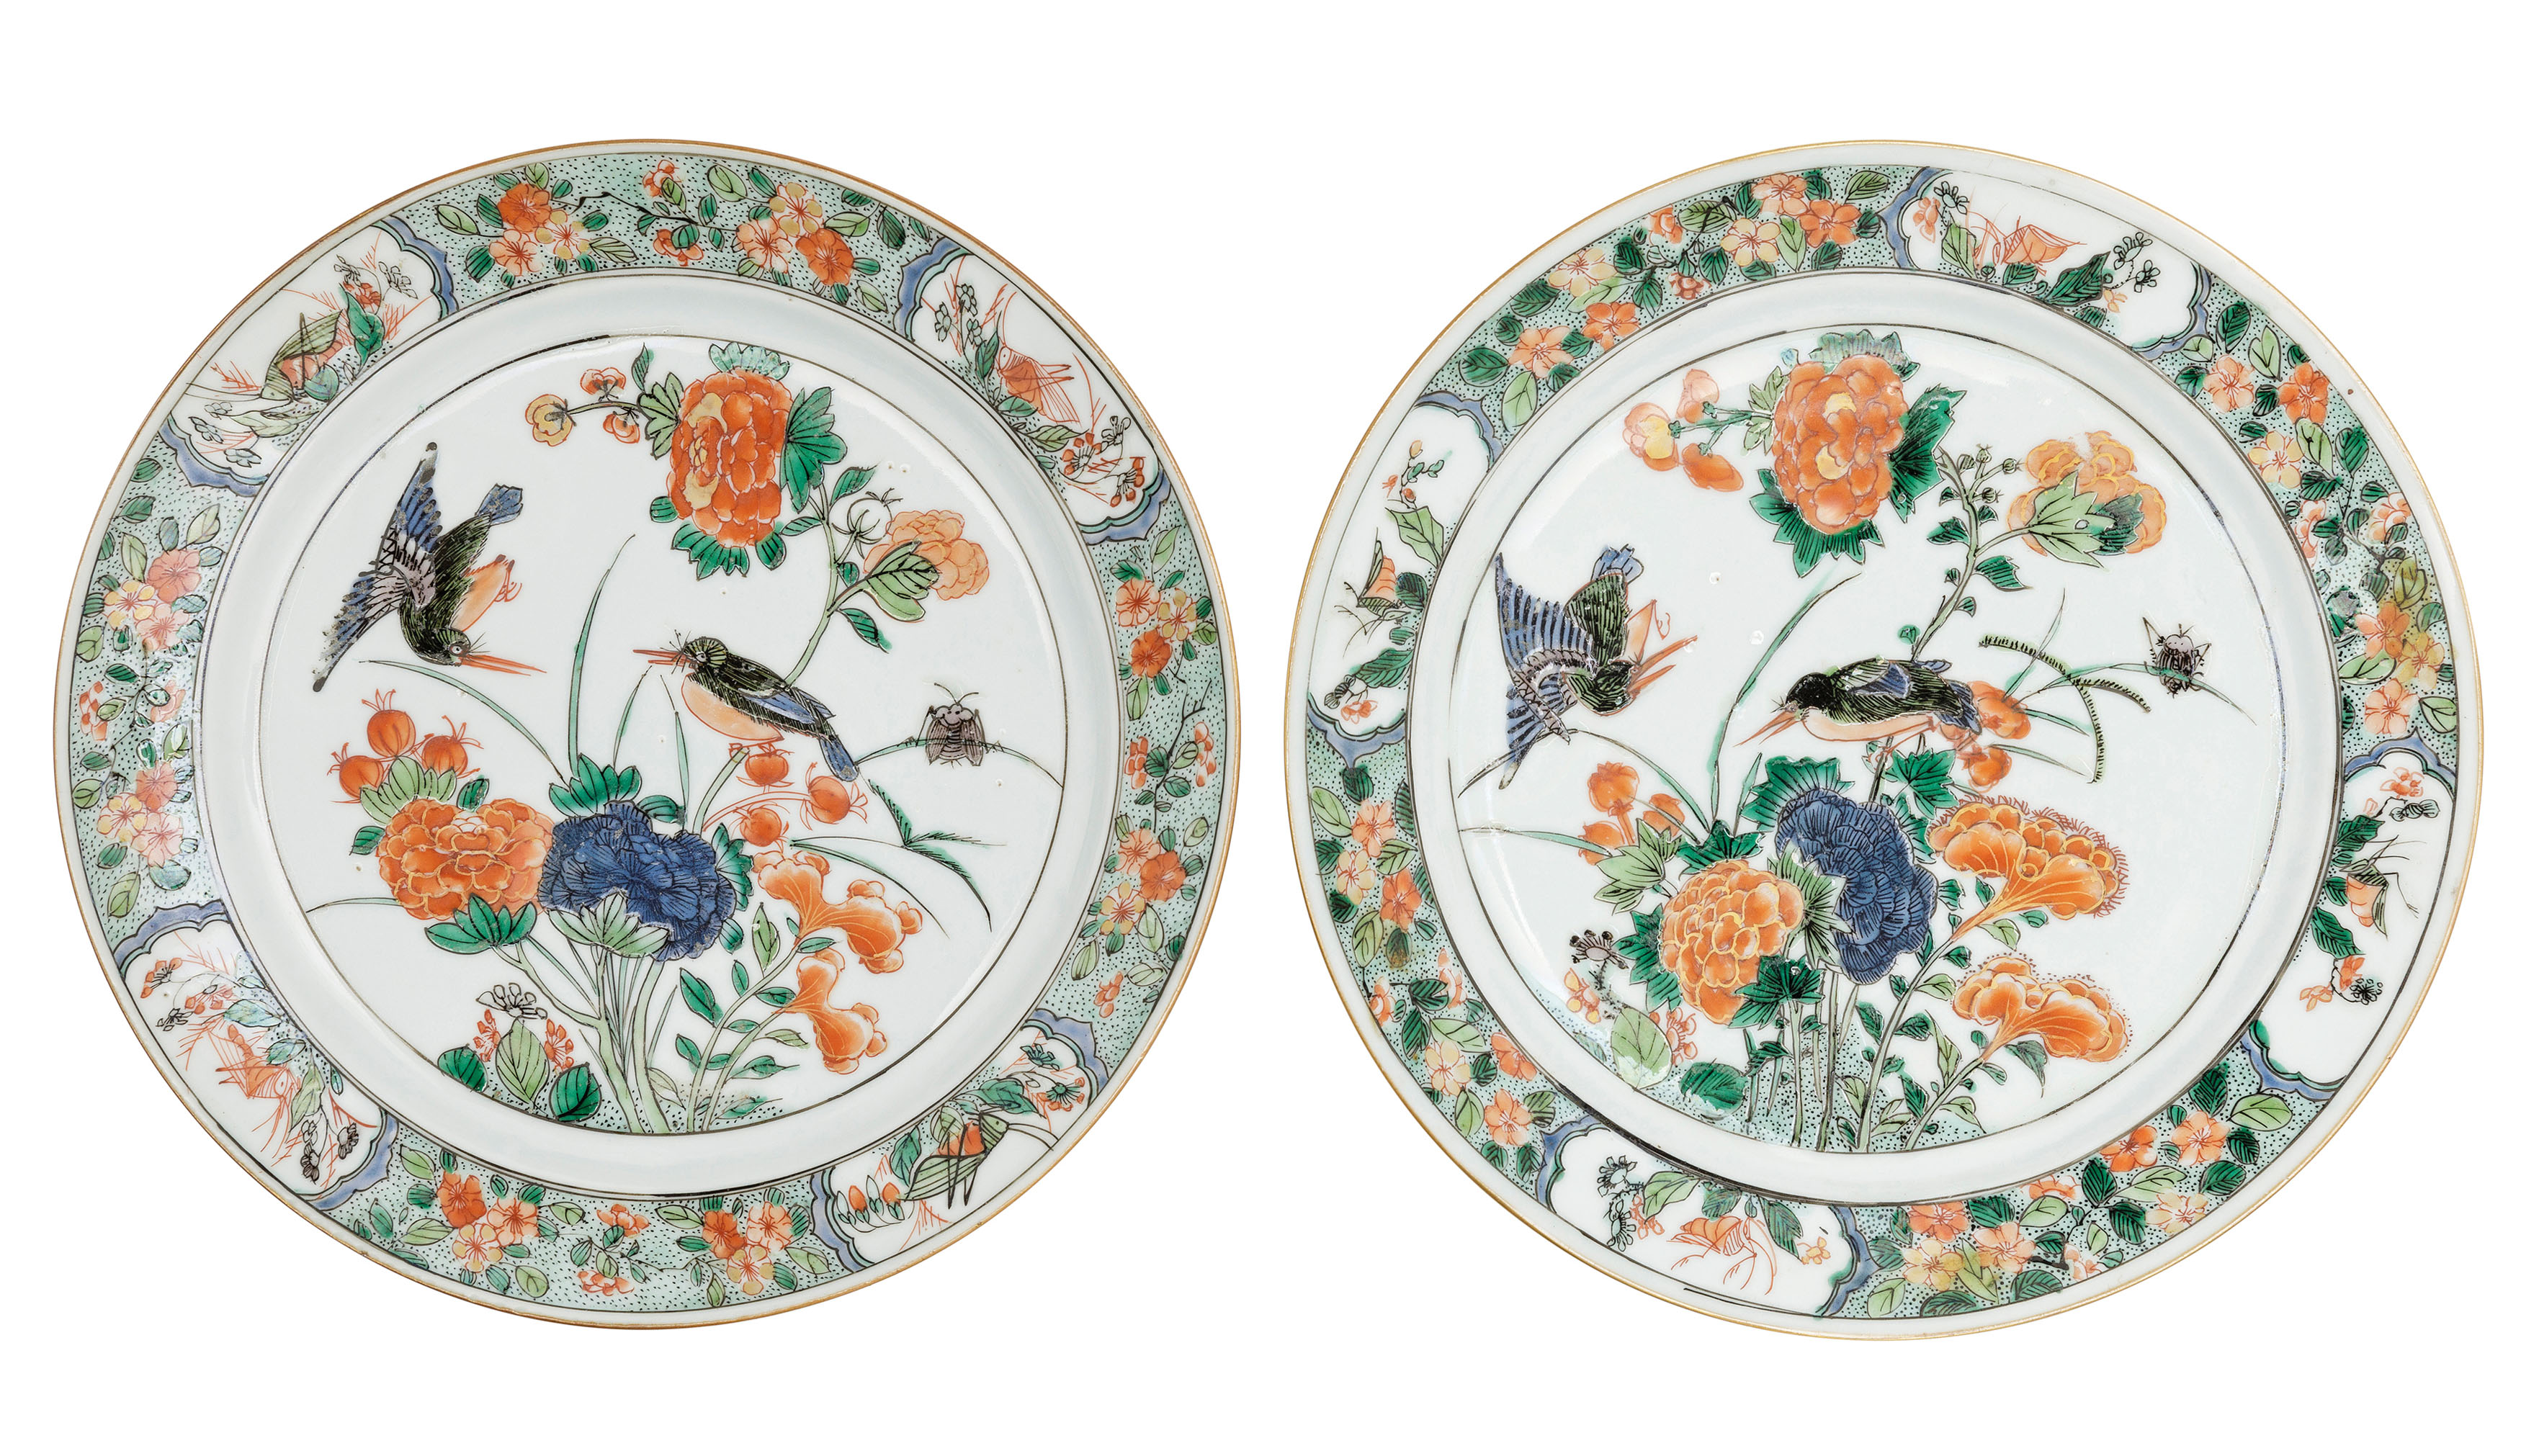 A PAIR OF FAMILLE VERTE PORCELAIN BIRD AND PEONY DISHES, CHINA 18TH CENTURY (2)